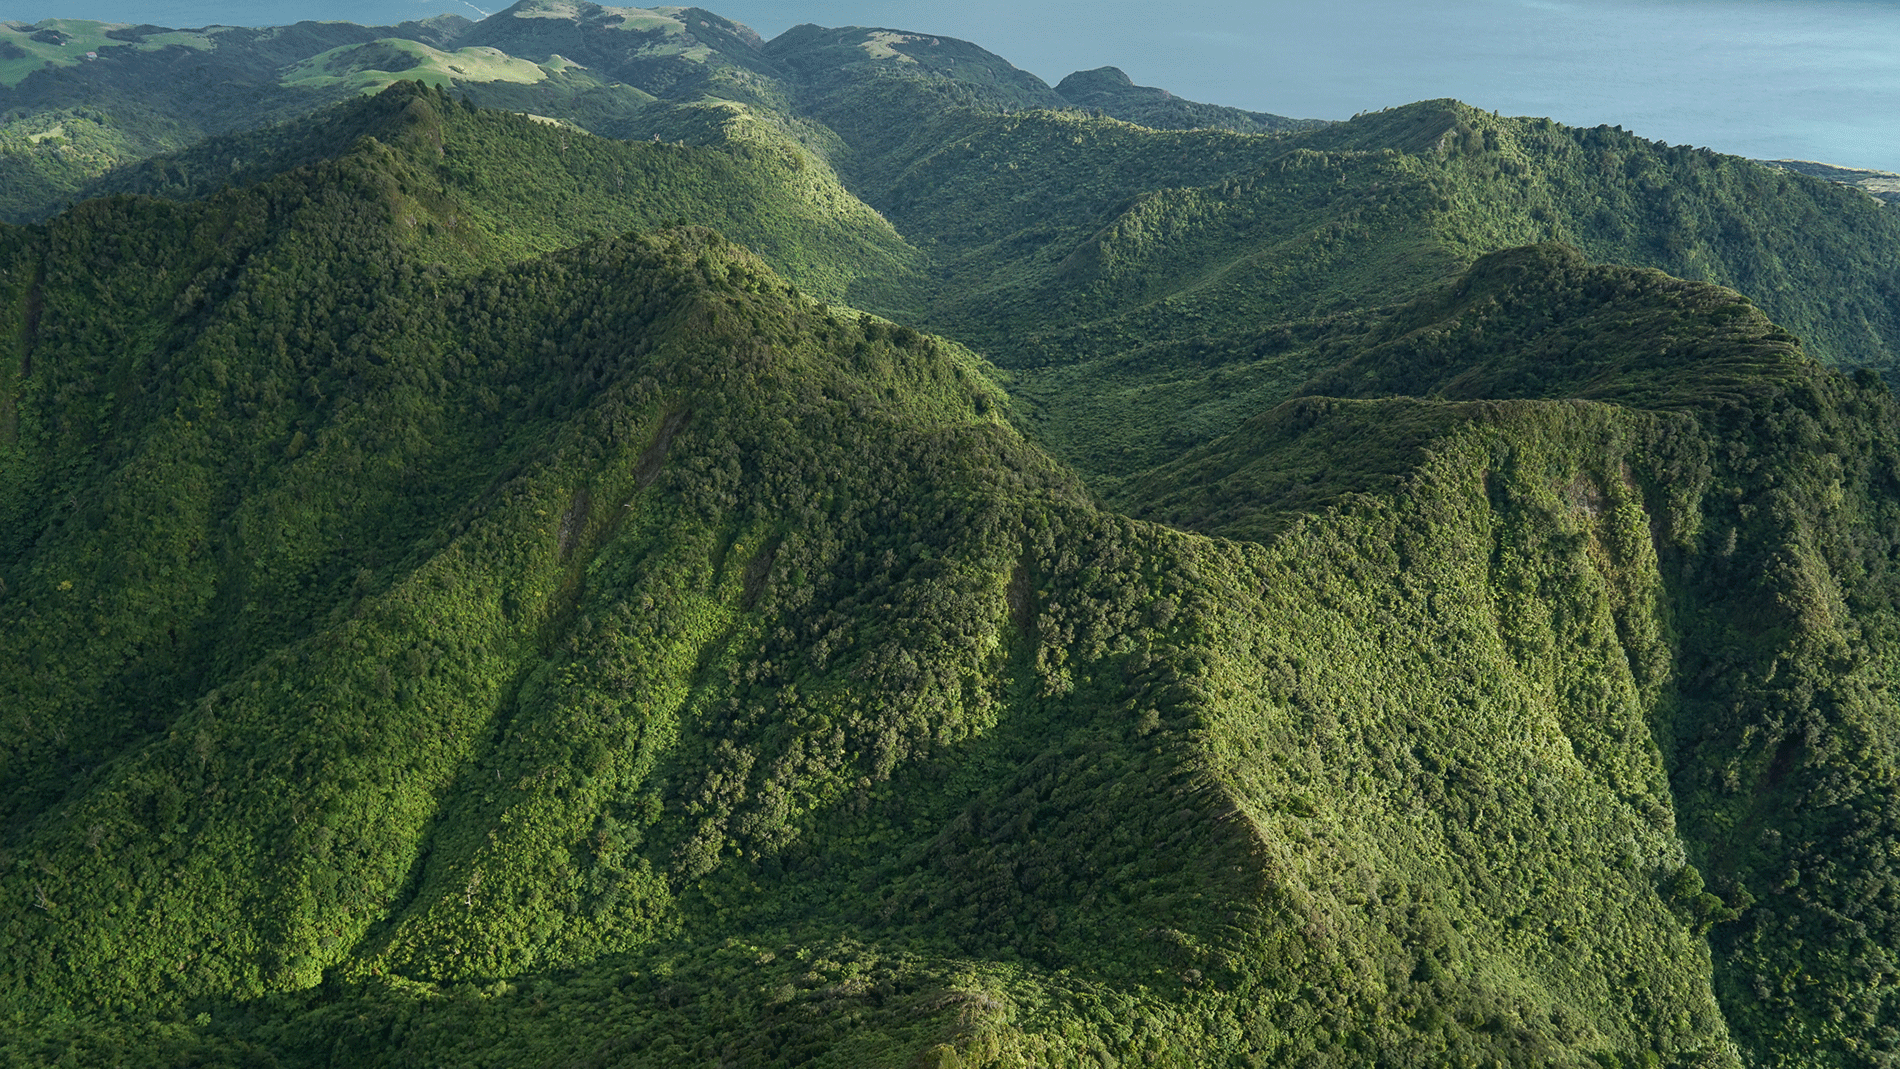 Image - Aerial photo of Mt Karioi and its surroundings